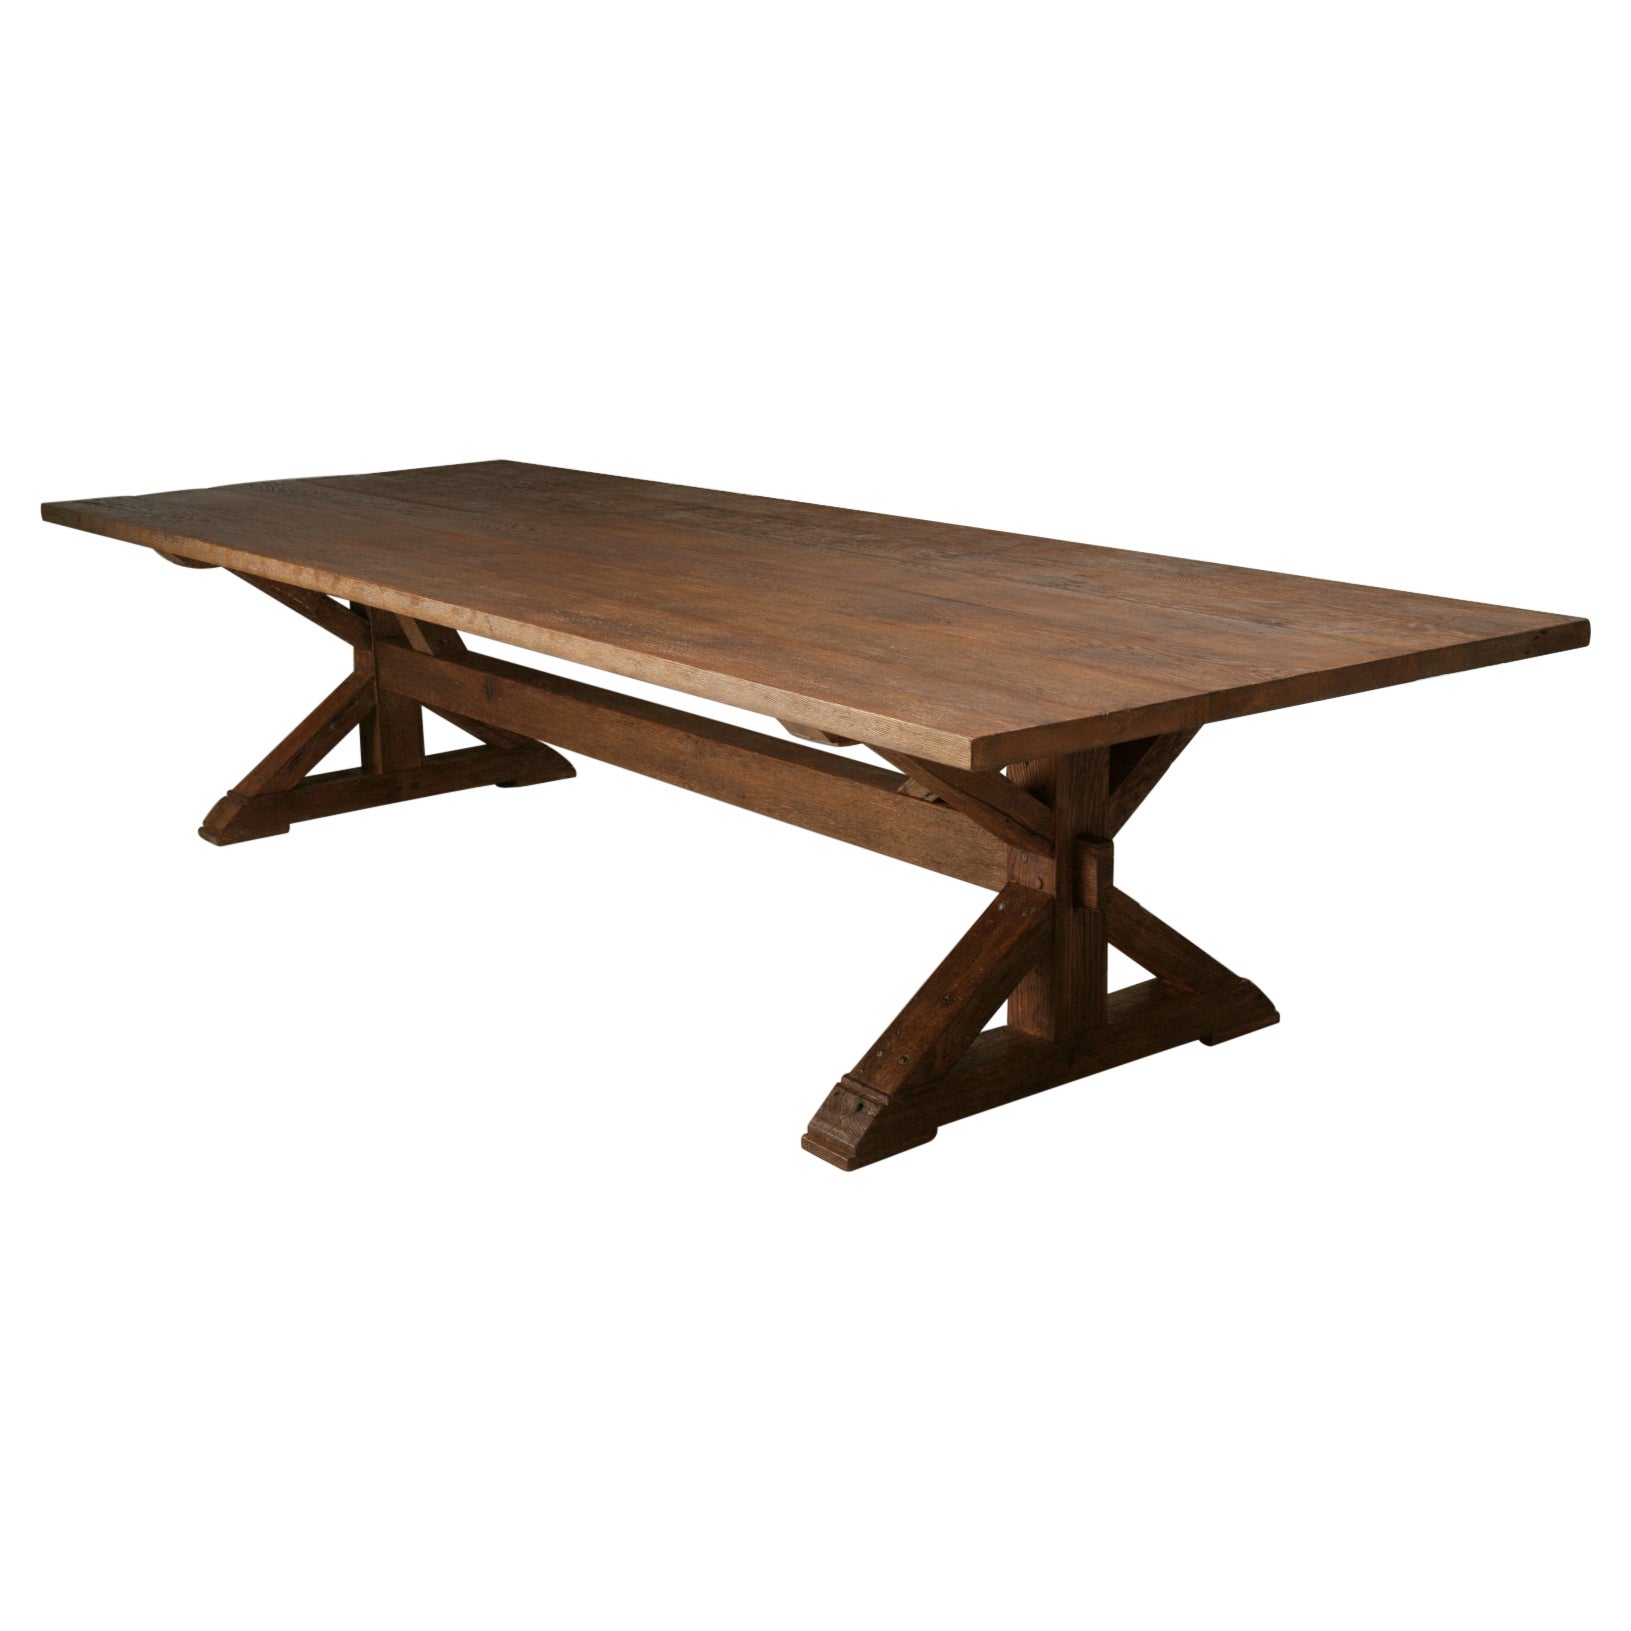 French Inspired Dining or Farm Table Reclaimed Oak Made to Order Any Size, Color For Sale